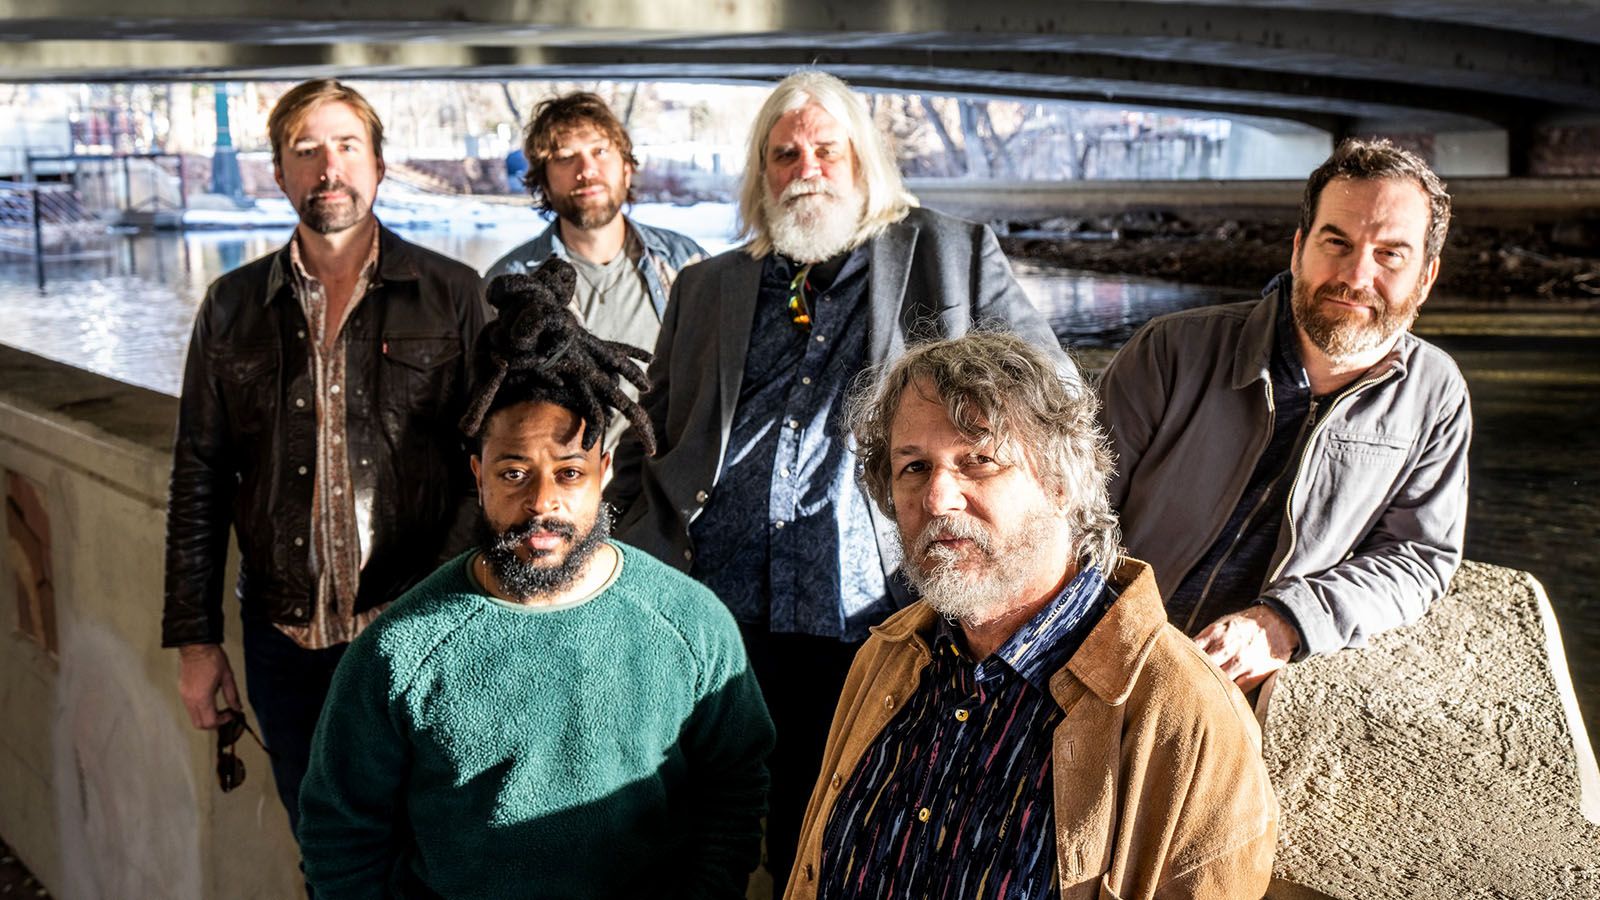 Jam band pioneers Leftover Salmon will perform at Sweetwater Performance Pavilion on June 1.